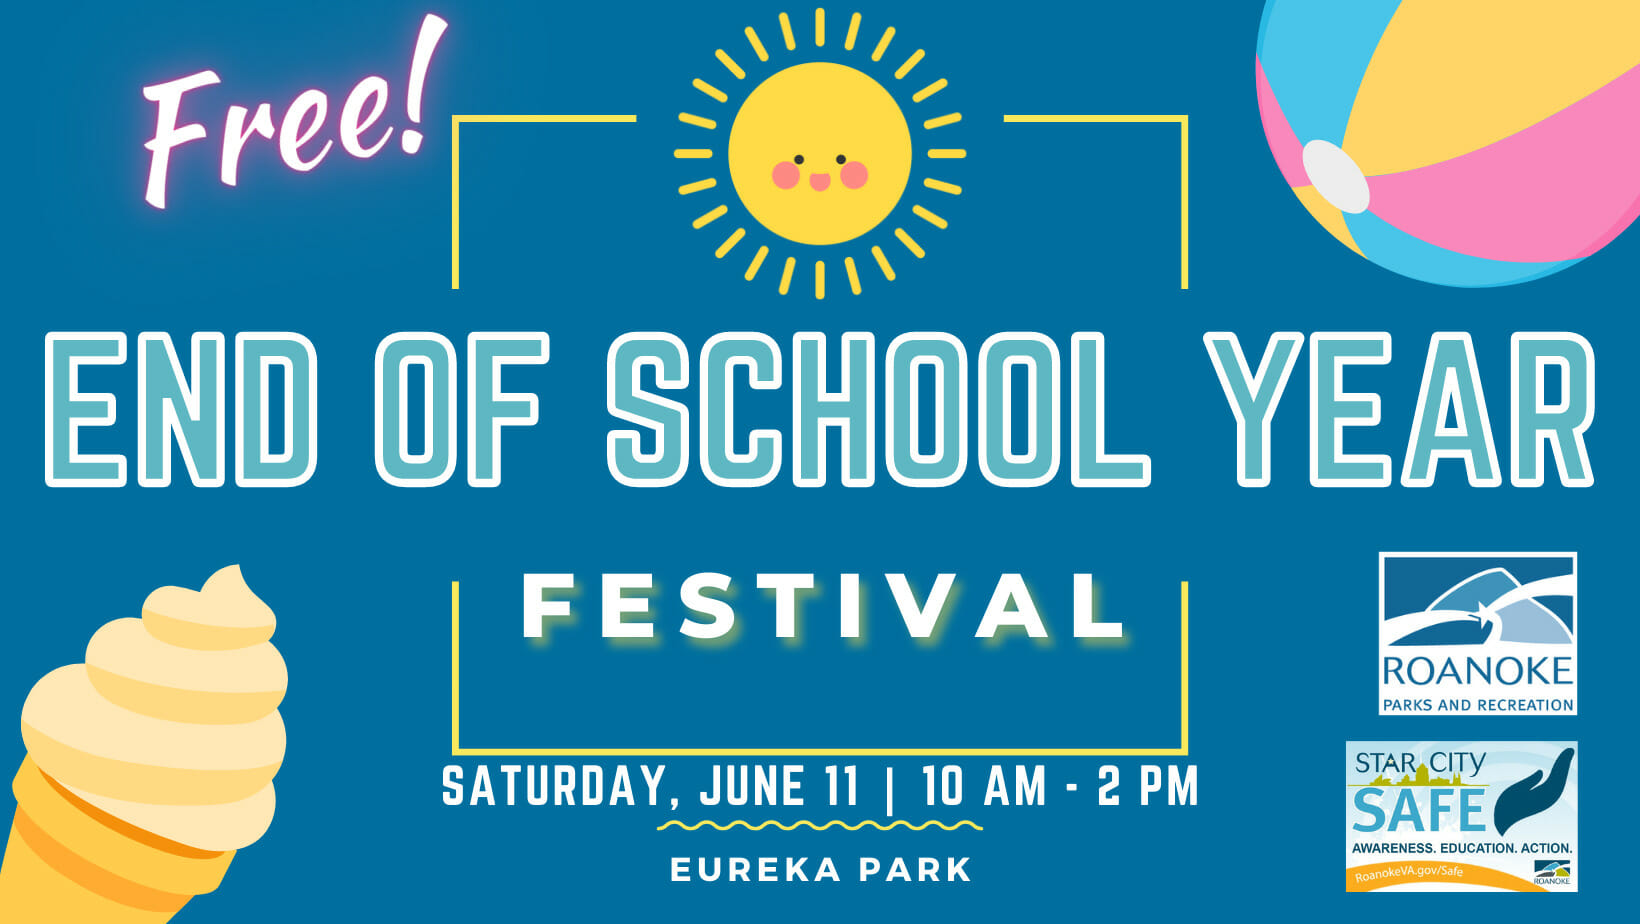 End of School Year Festival Facebook Post Facebook Cover